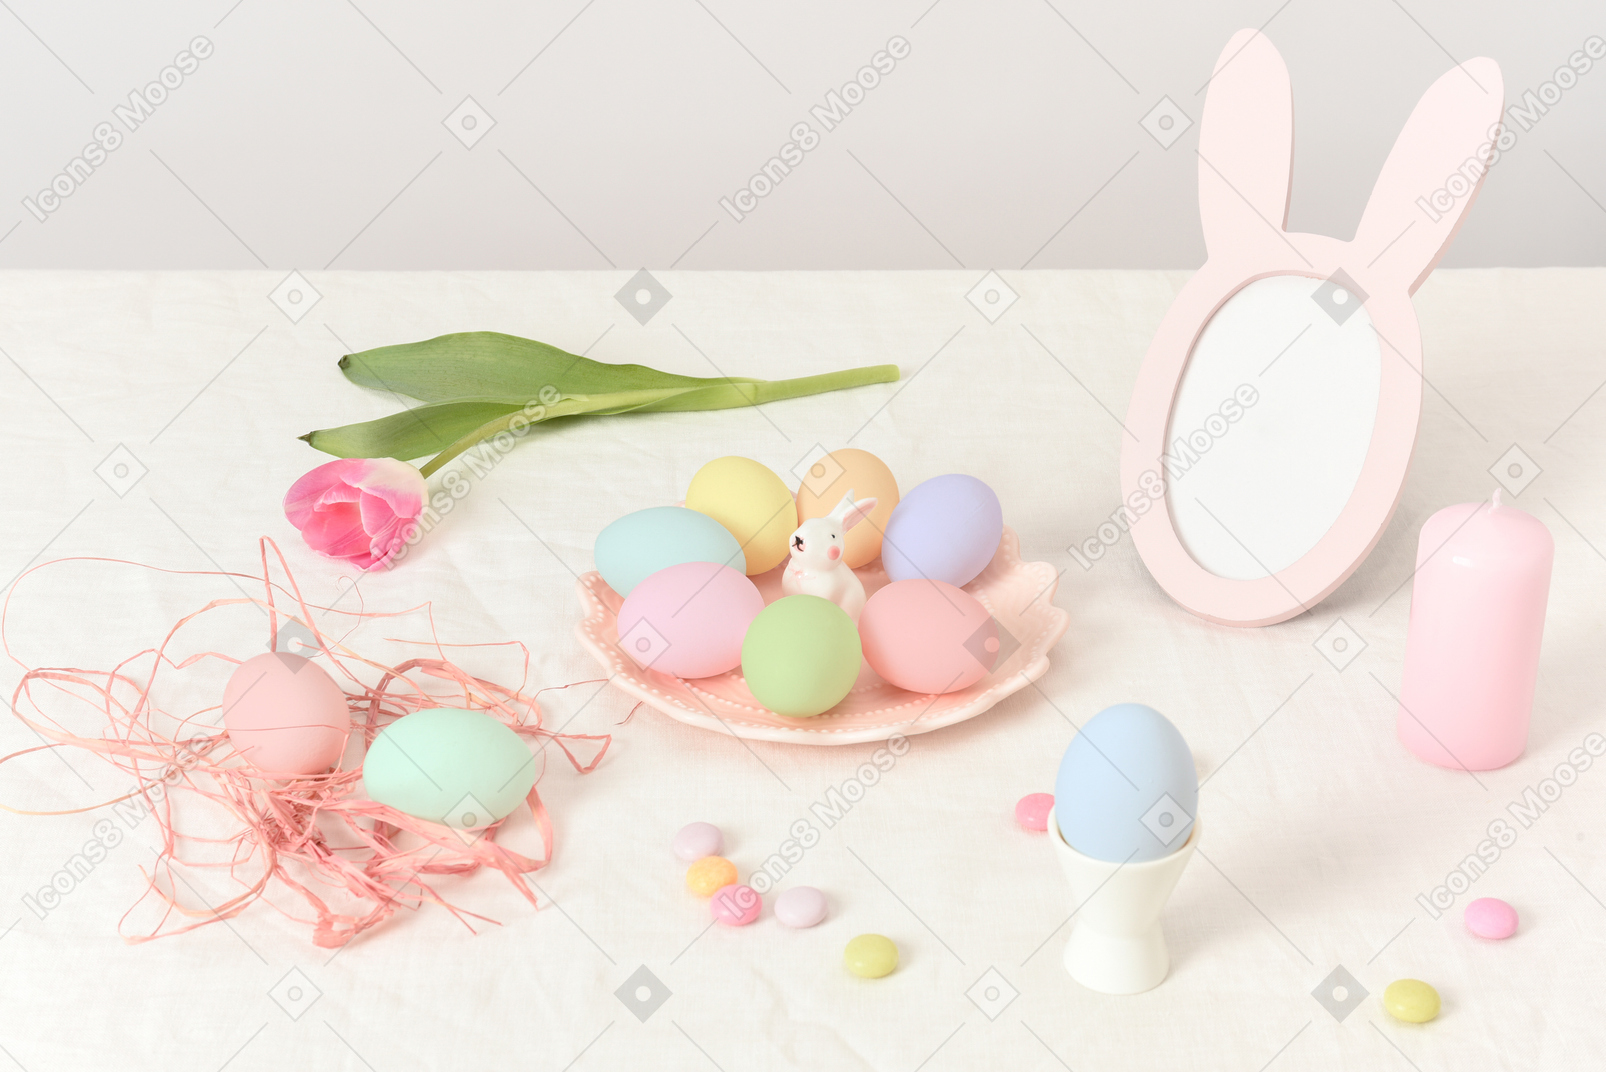 Colorful easter eggs and decorations